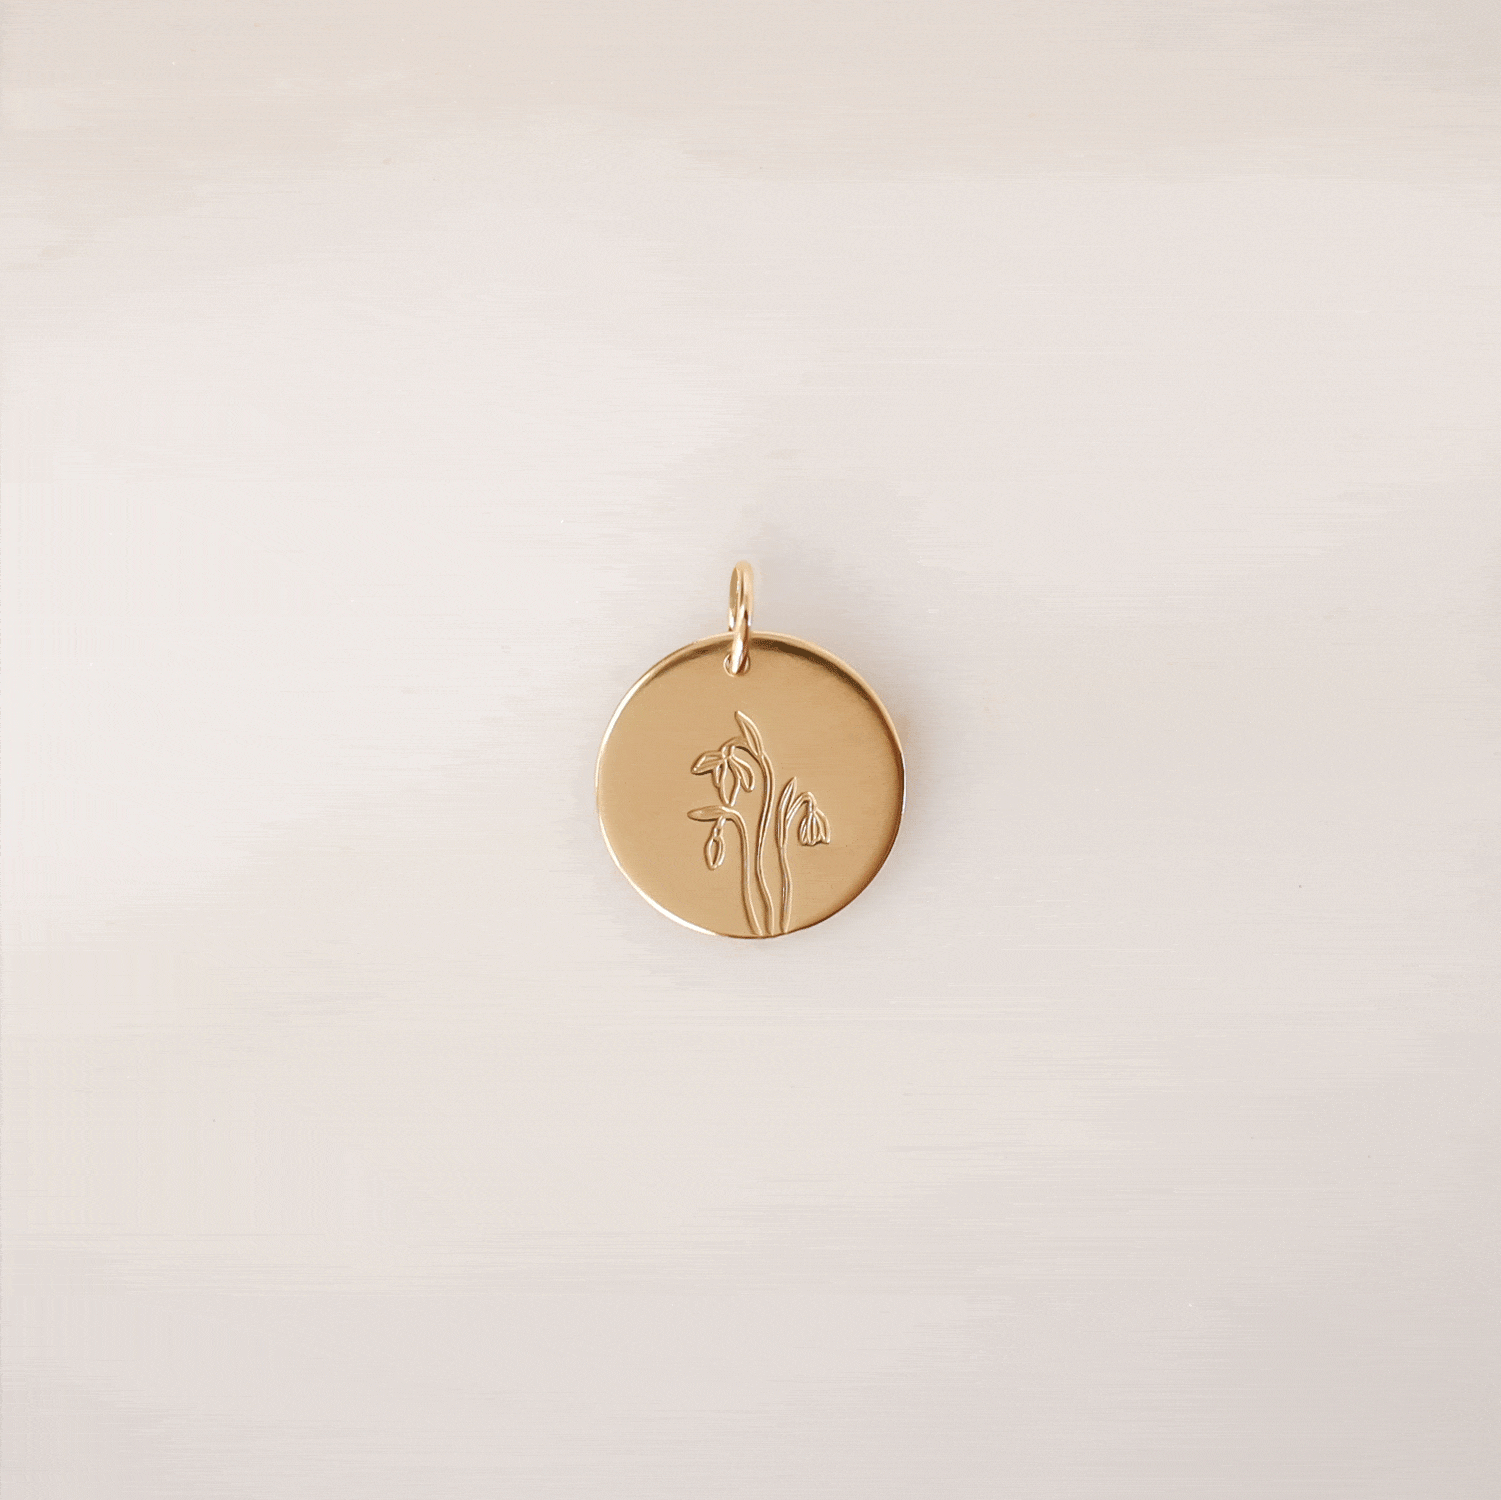 Birth Flower Charm • Add On - Nolia Jewelry - Meaningful + Sustainably Handcrafted Jewelry